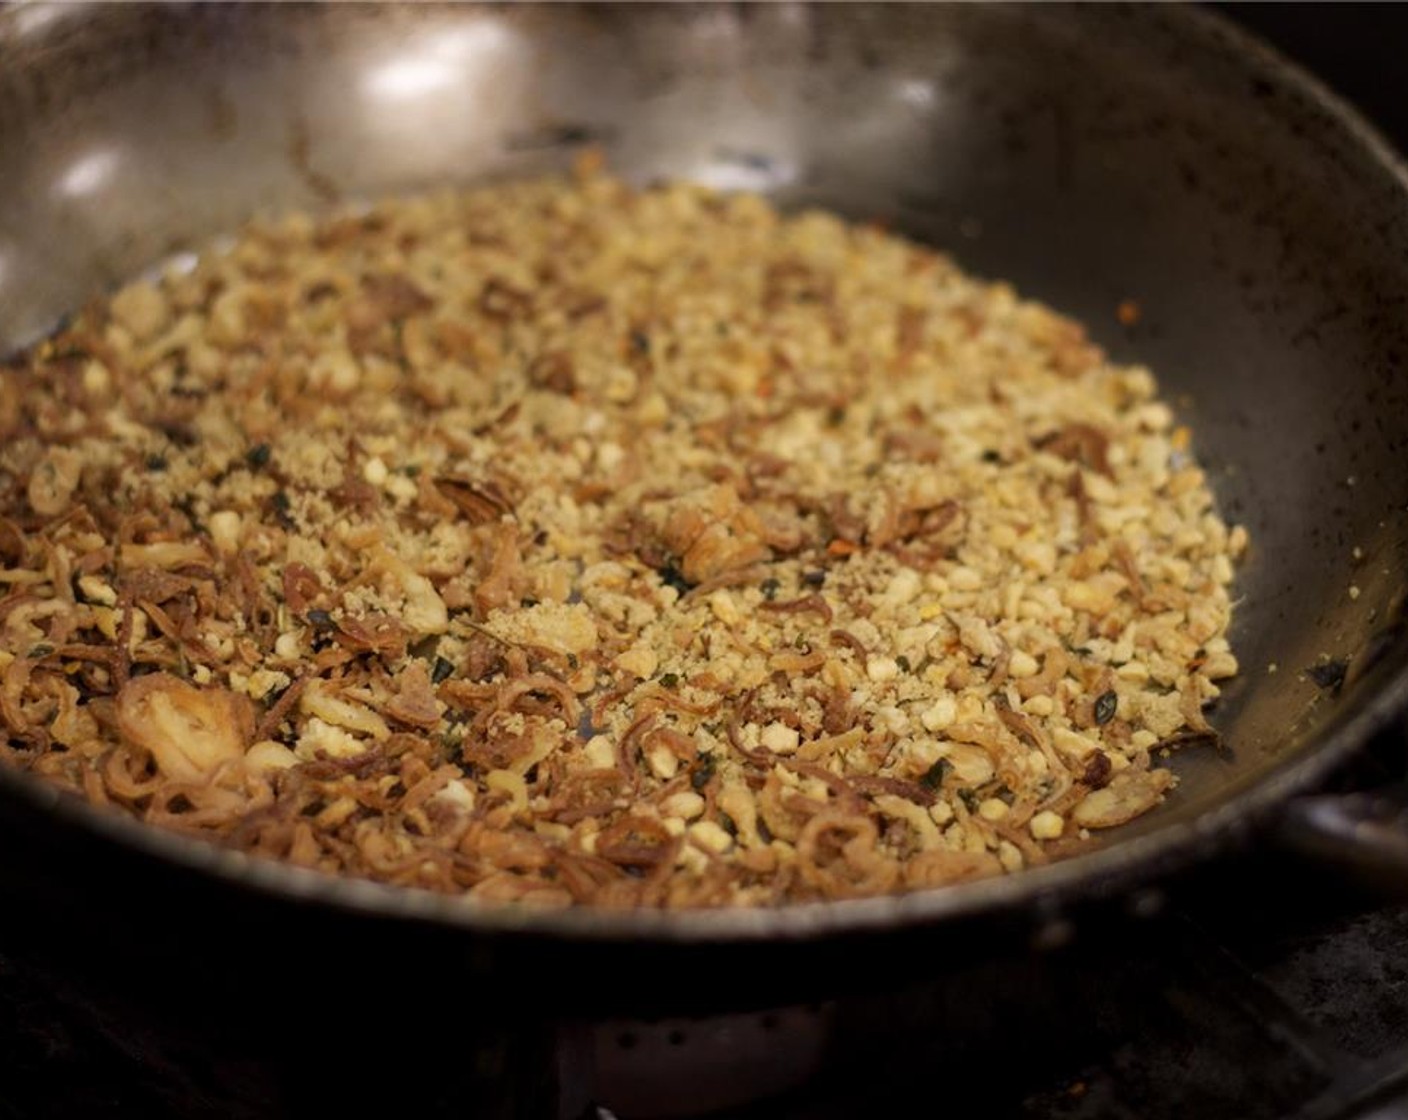 step 3 Combine Crushed Red Pepper Flakes (2 Tbsp), toasted garlic, fried shallots, and Brown Sugar (2 1/2 cups) in a mixing bowl and toss well. Place the chili sugar mixture into a room temperature heavy-bottomed pot or pan.